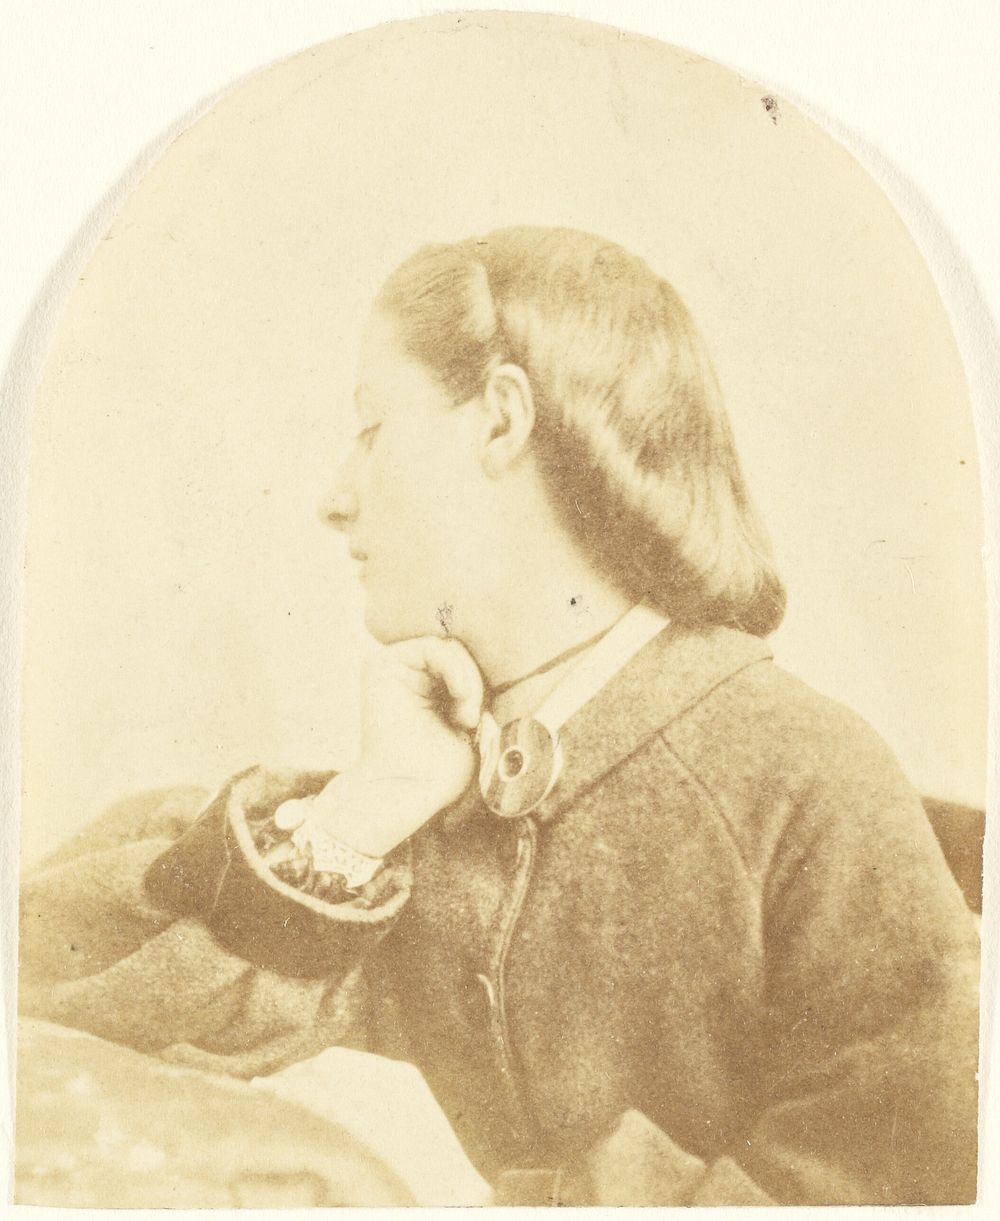 Portrait of a Woman in Profile with One Hand to Her Chin by Oscar Gustave Rejlander